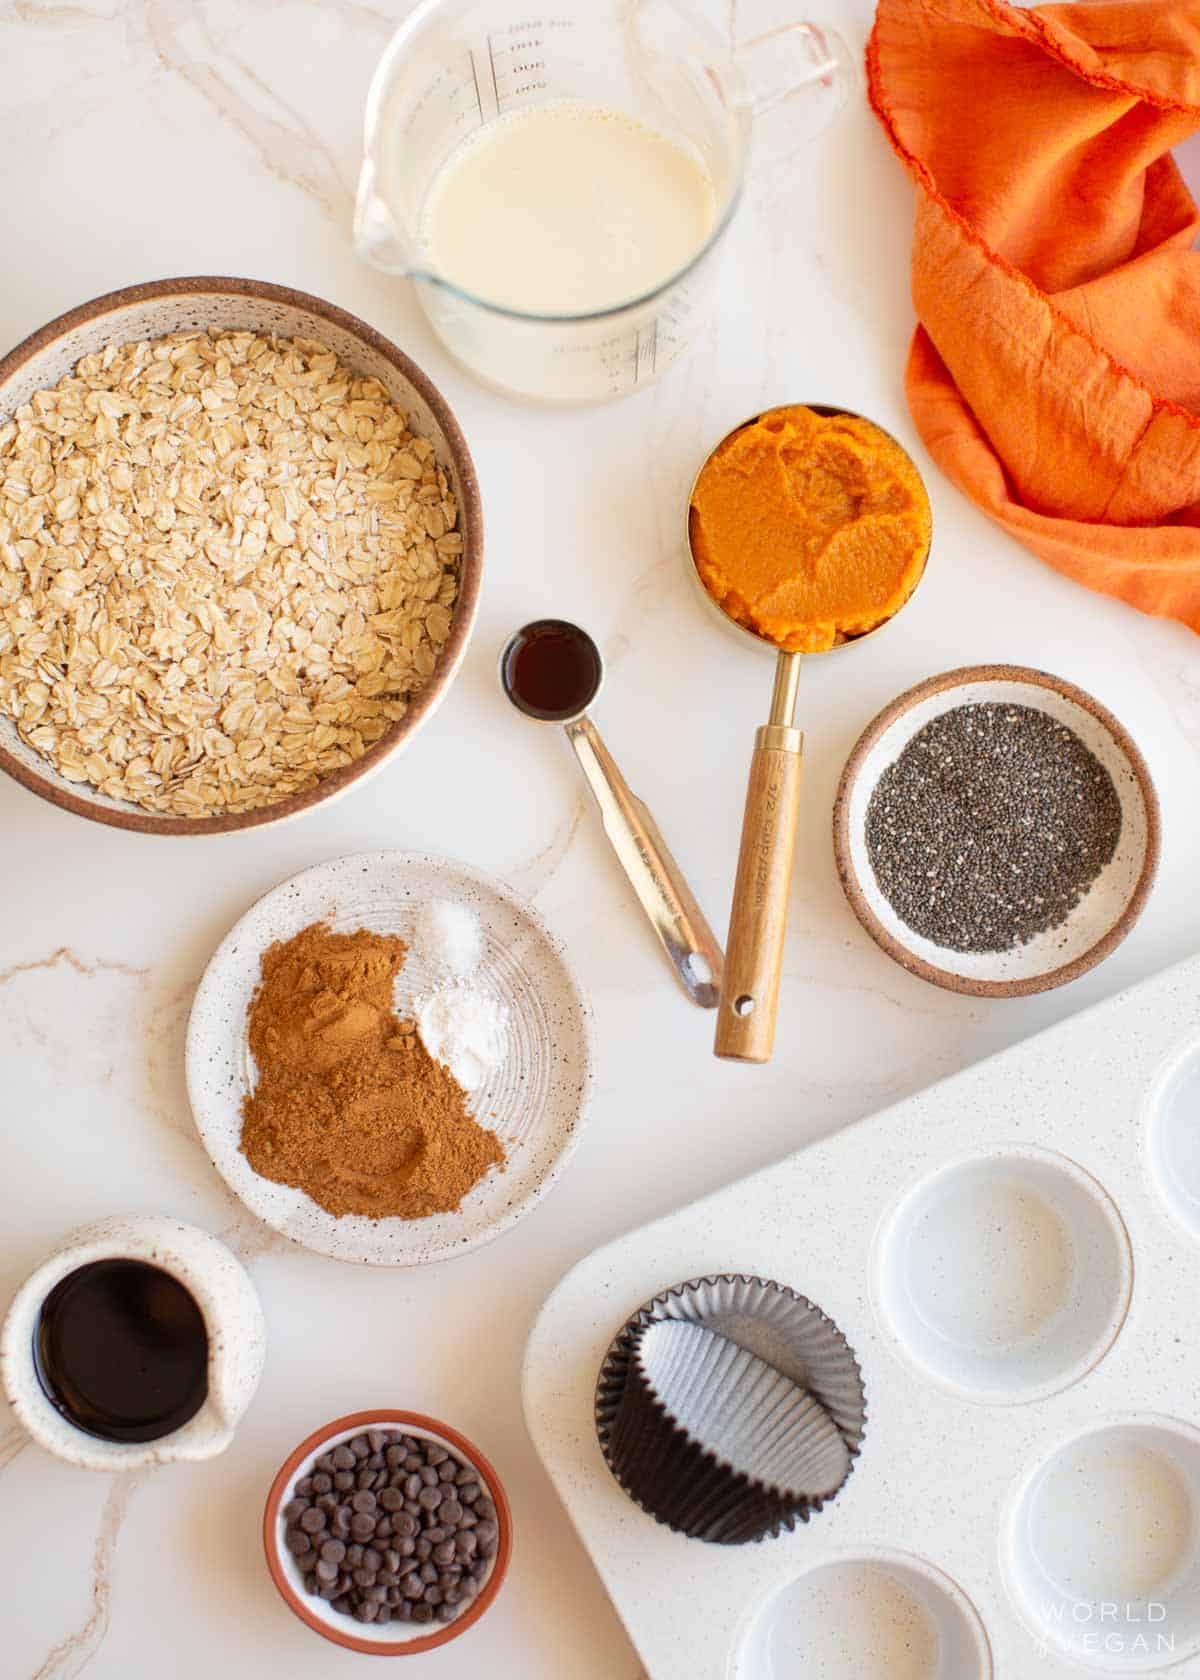 Ingredients for pumpkin baked oatmeal bites measured out in various bowls and cups.